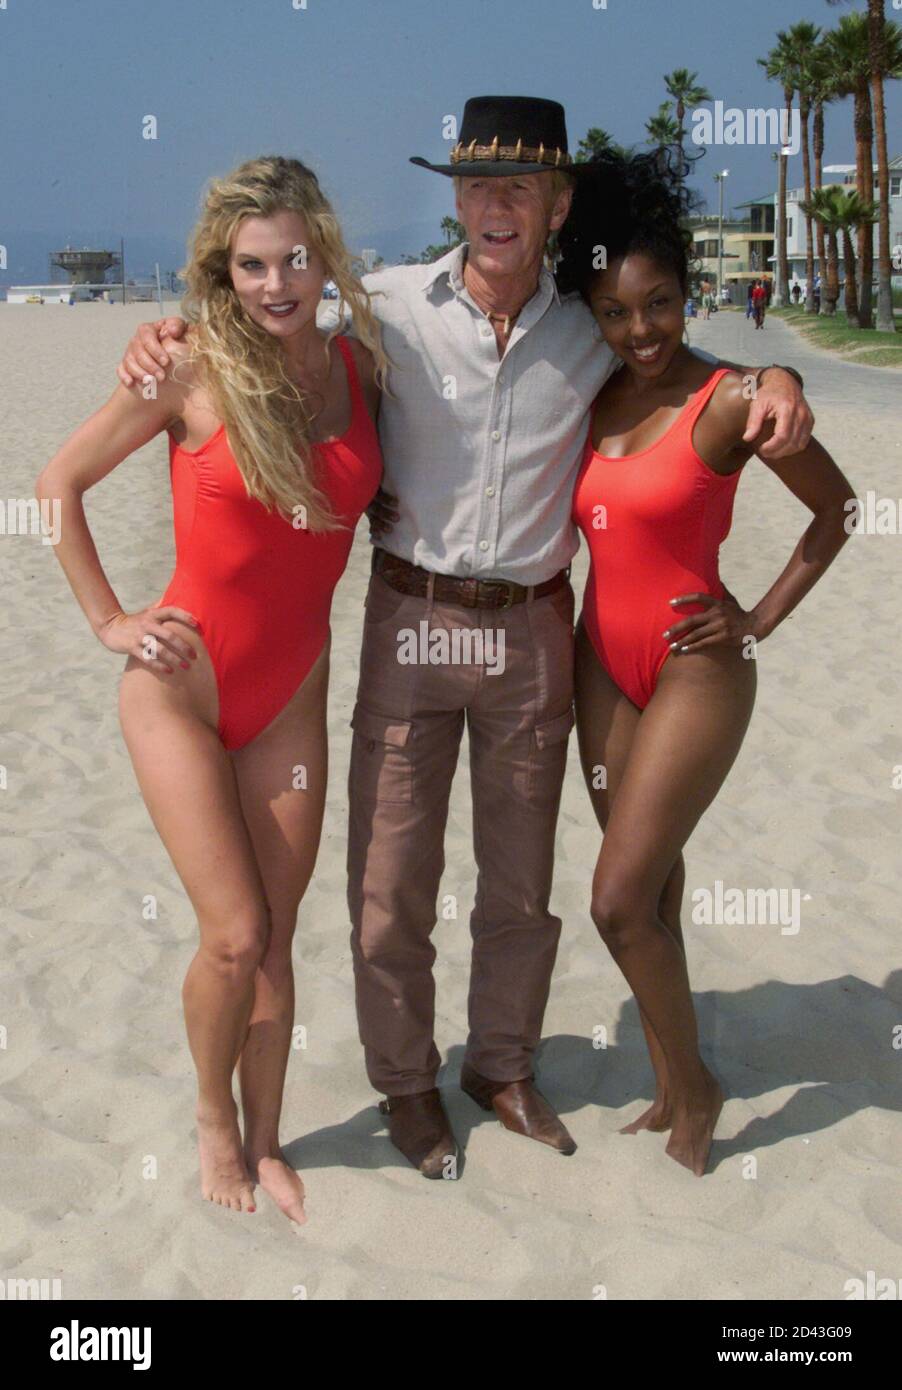 Actor Paul Hogan poses with models during a break in filming on the set of  his latest film " Crocodile Dundee in L.A." September 20, 2000 at Venice  Beach in Los Angeles. [